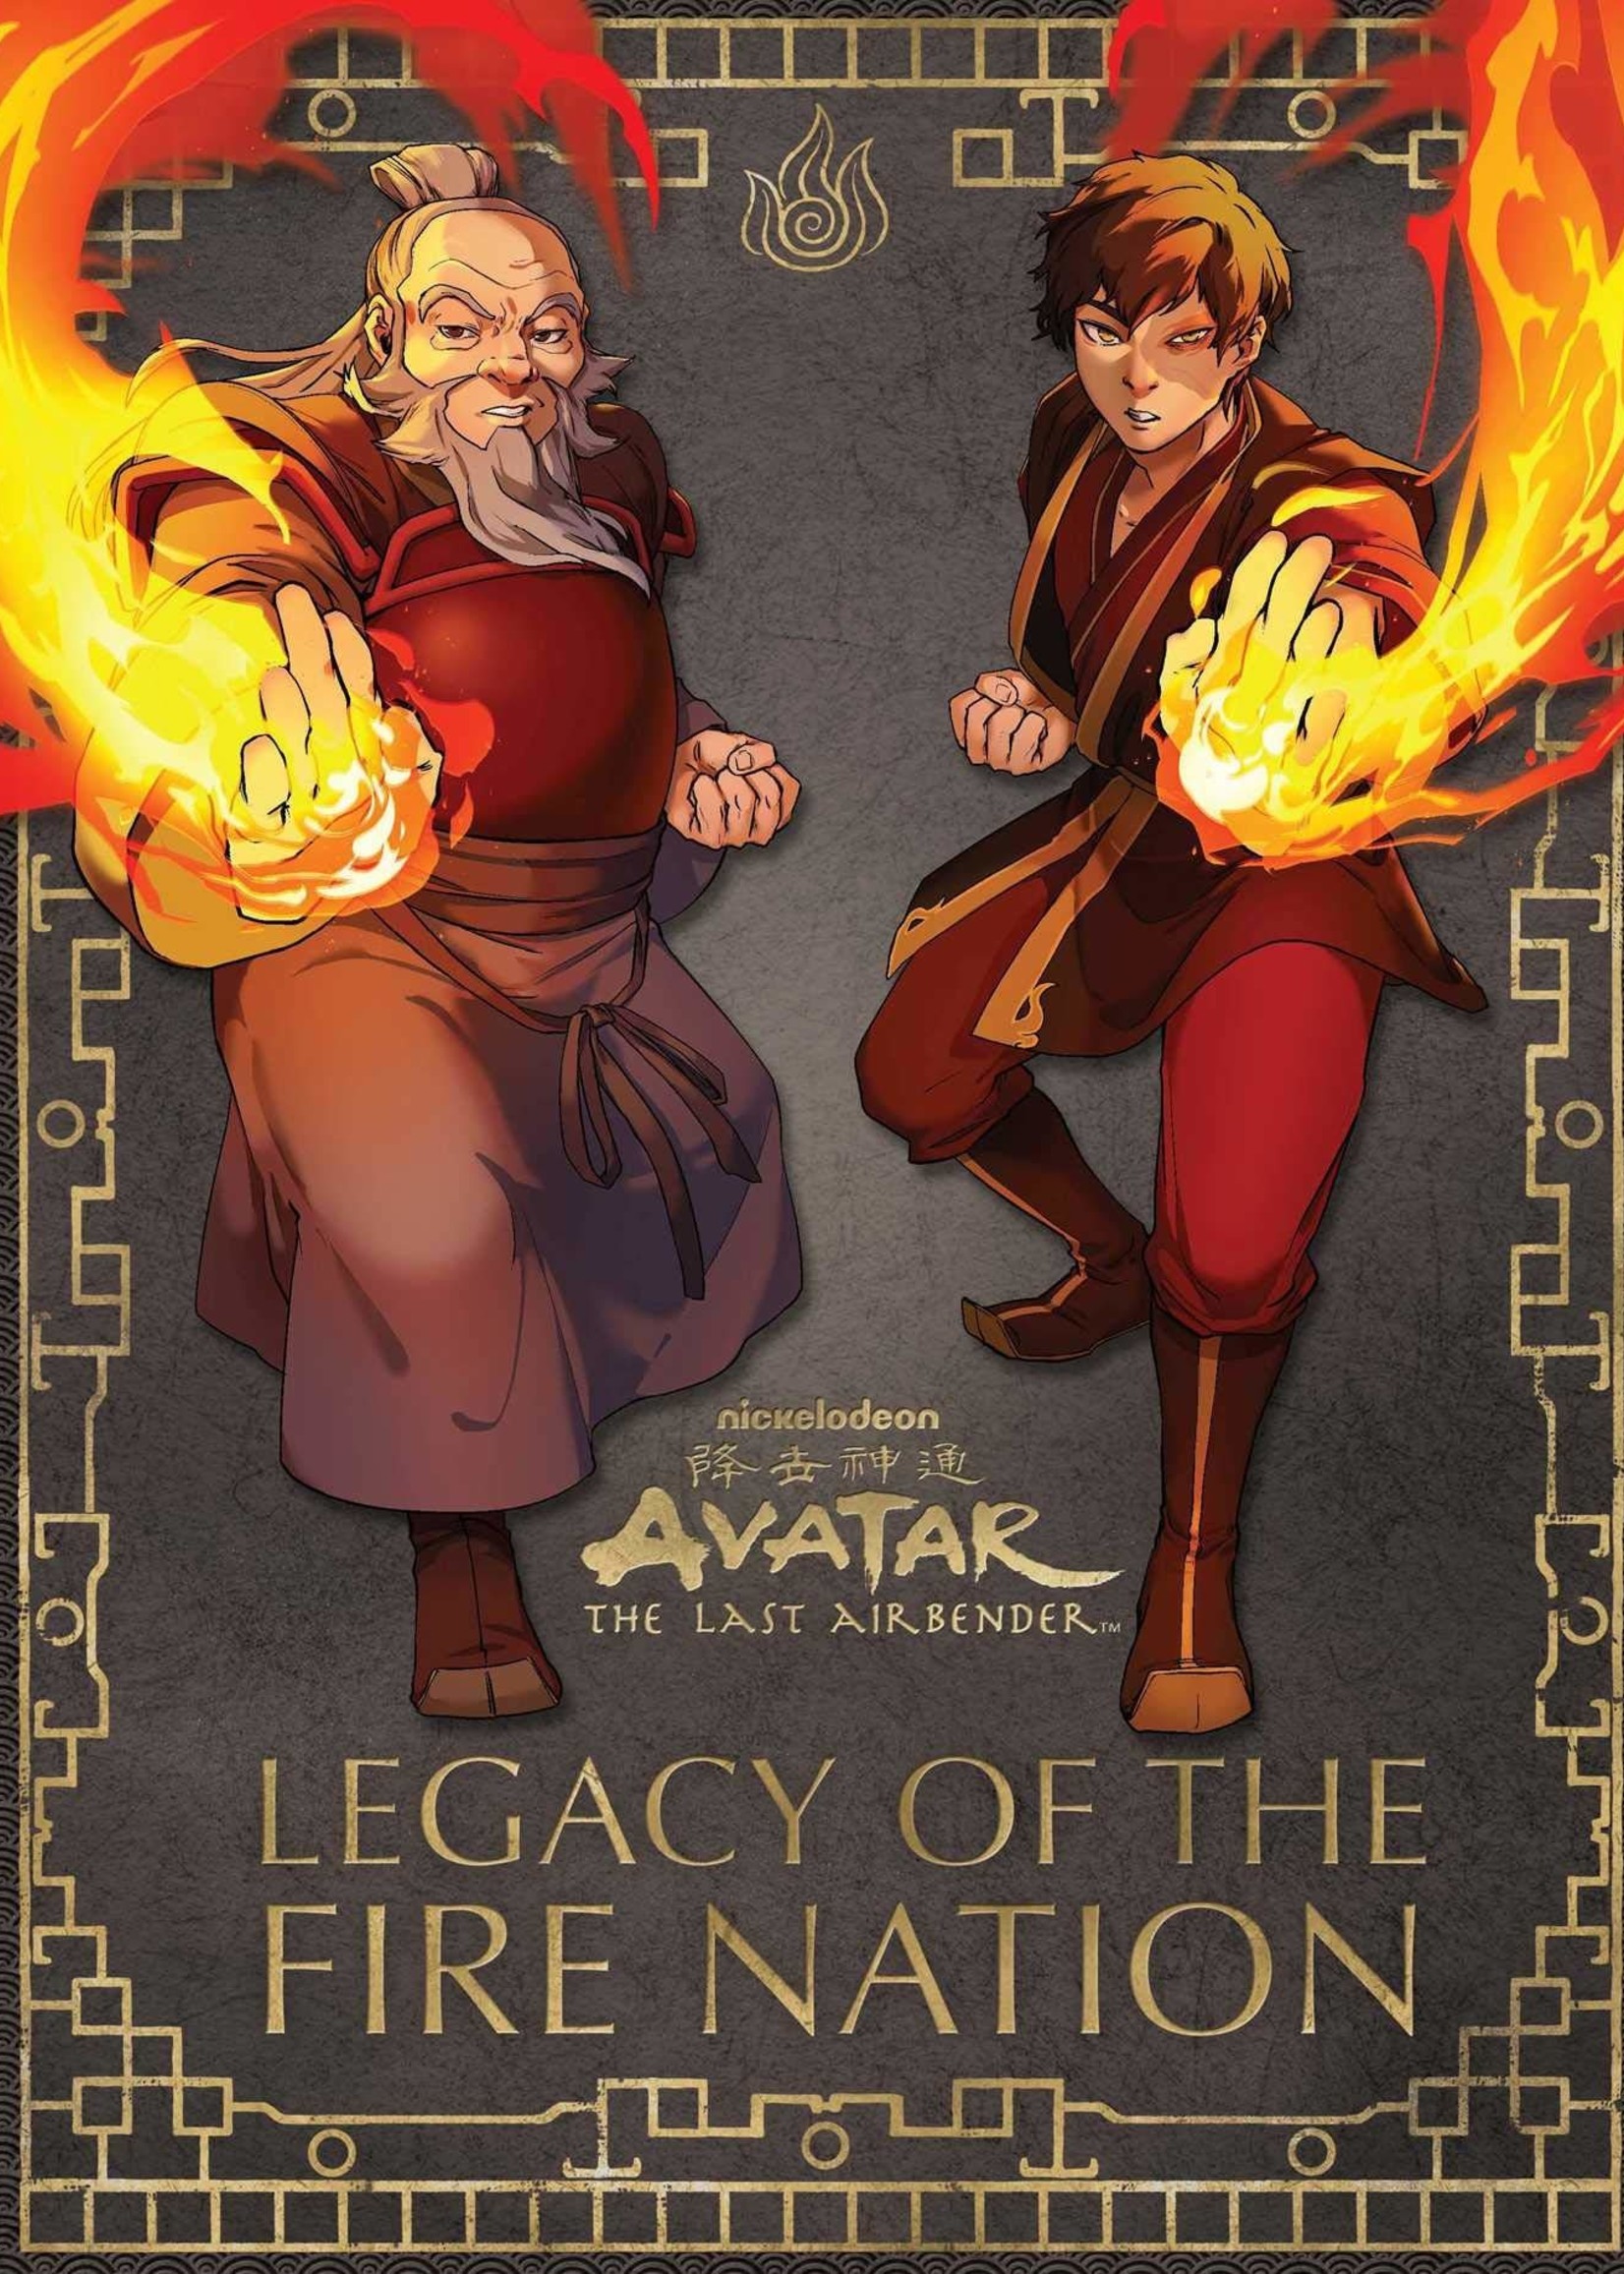 Avatar: The Last Airbender: Legacy of the Fire Nation - Hardcover